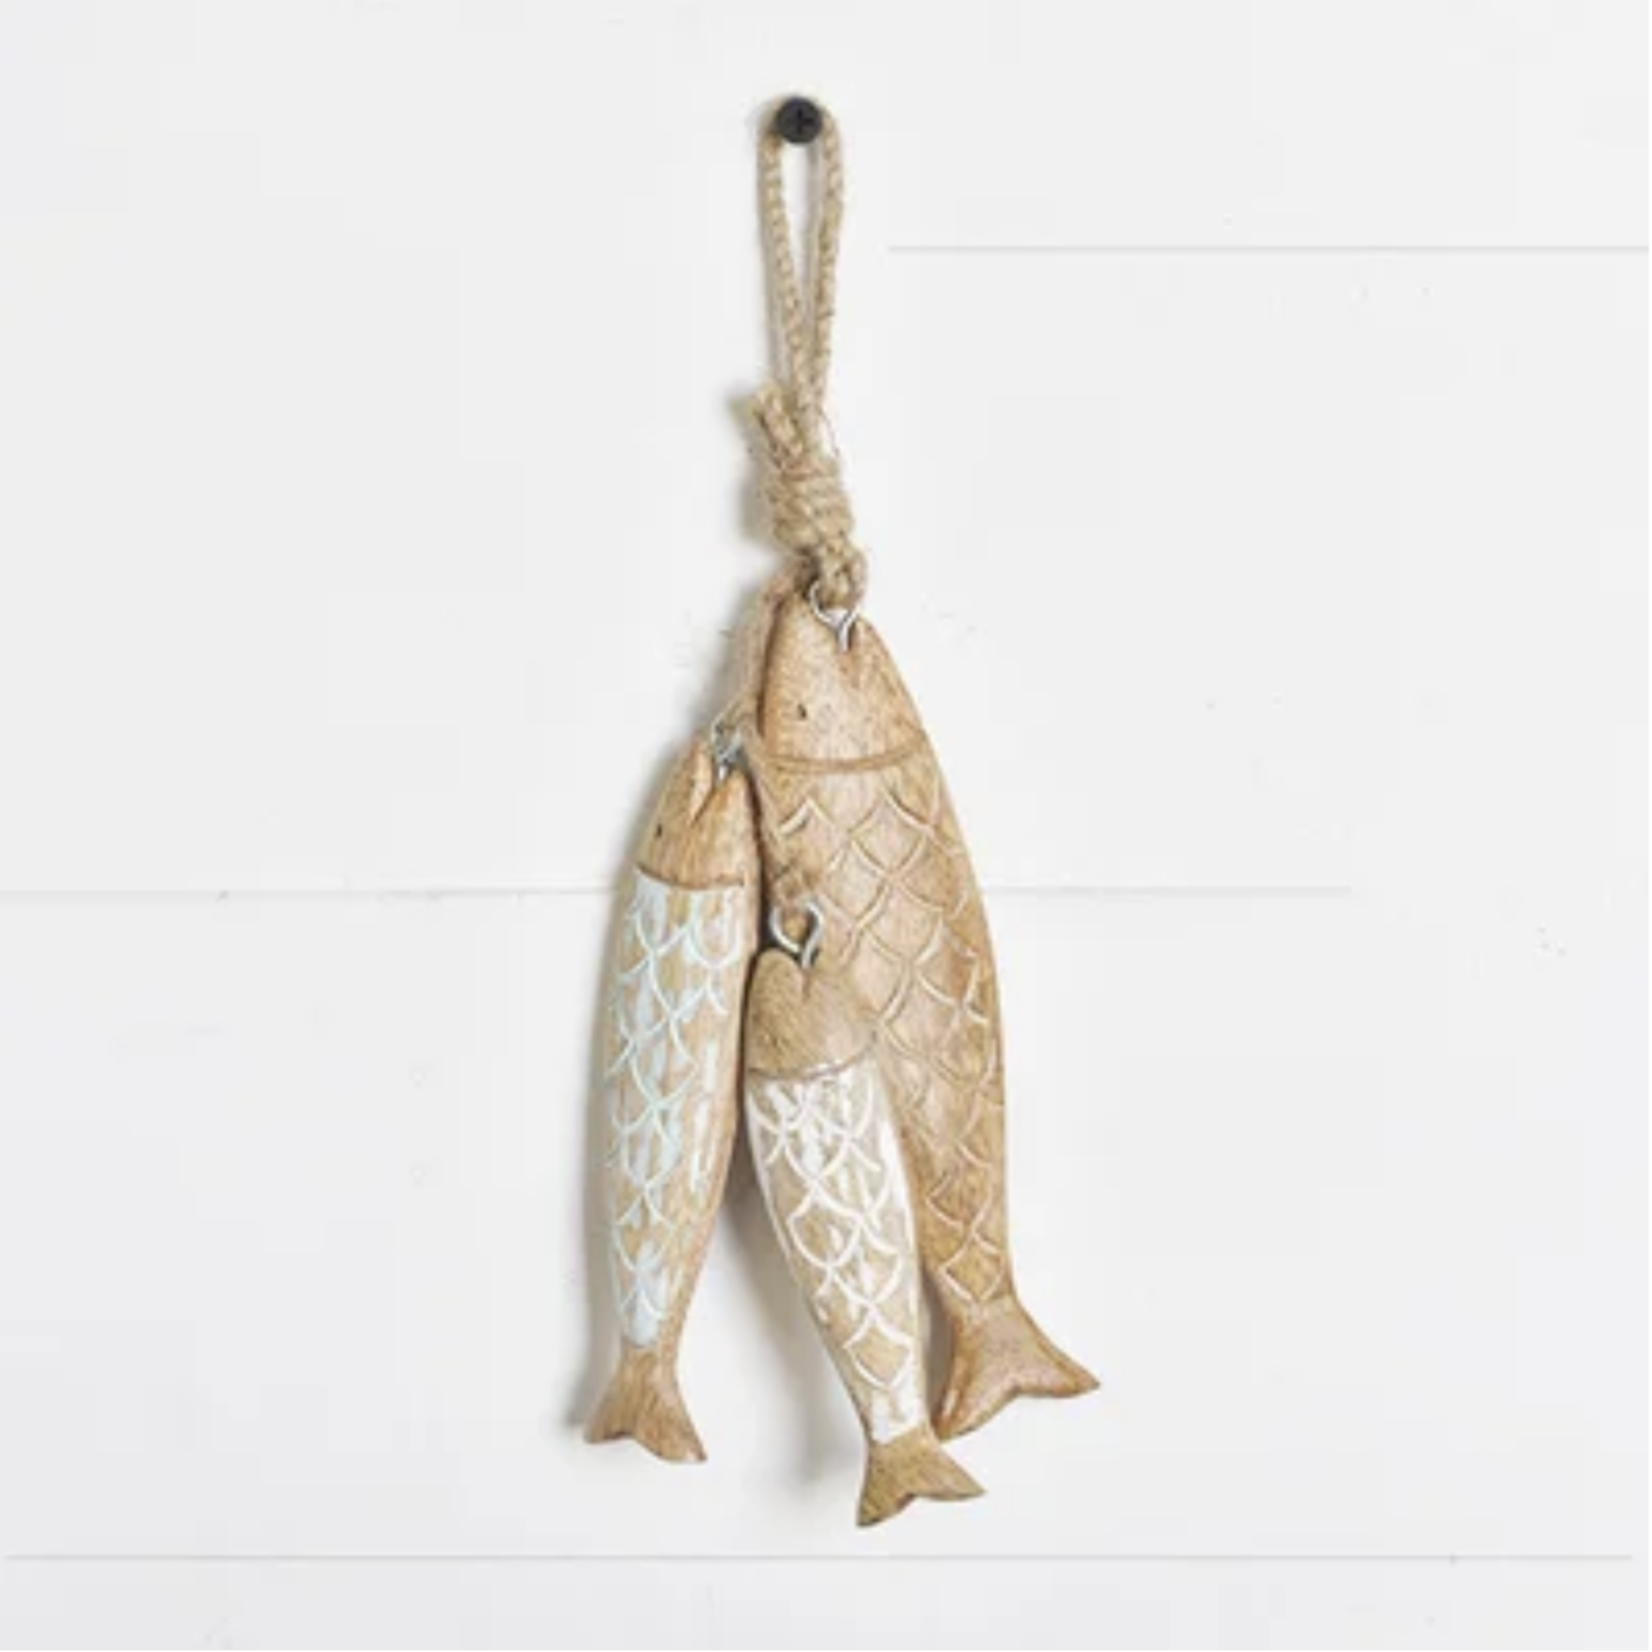 Outside The Box 6", 5" & 4" Set Of 3 Hanging Solid Wood Fish